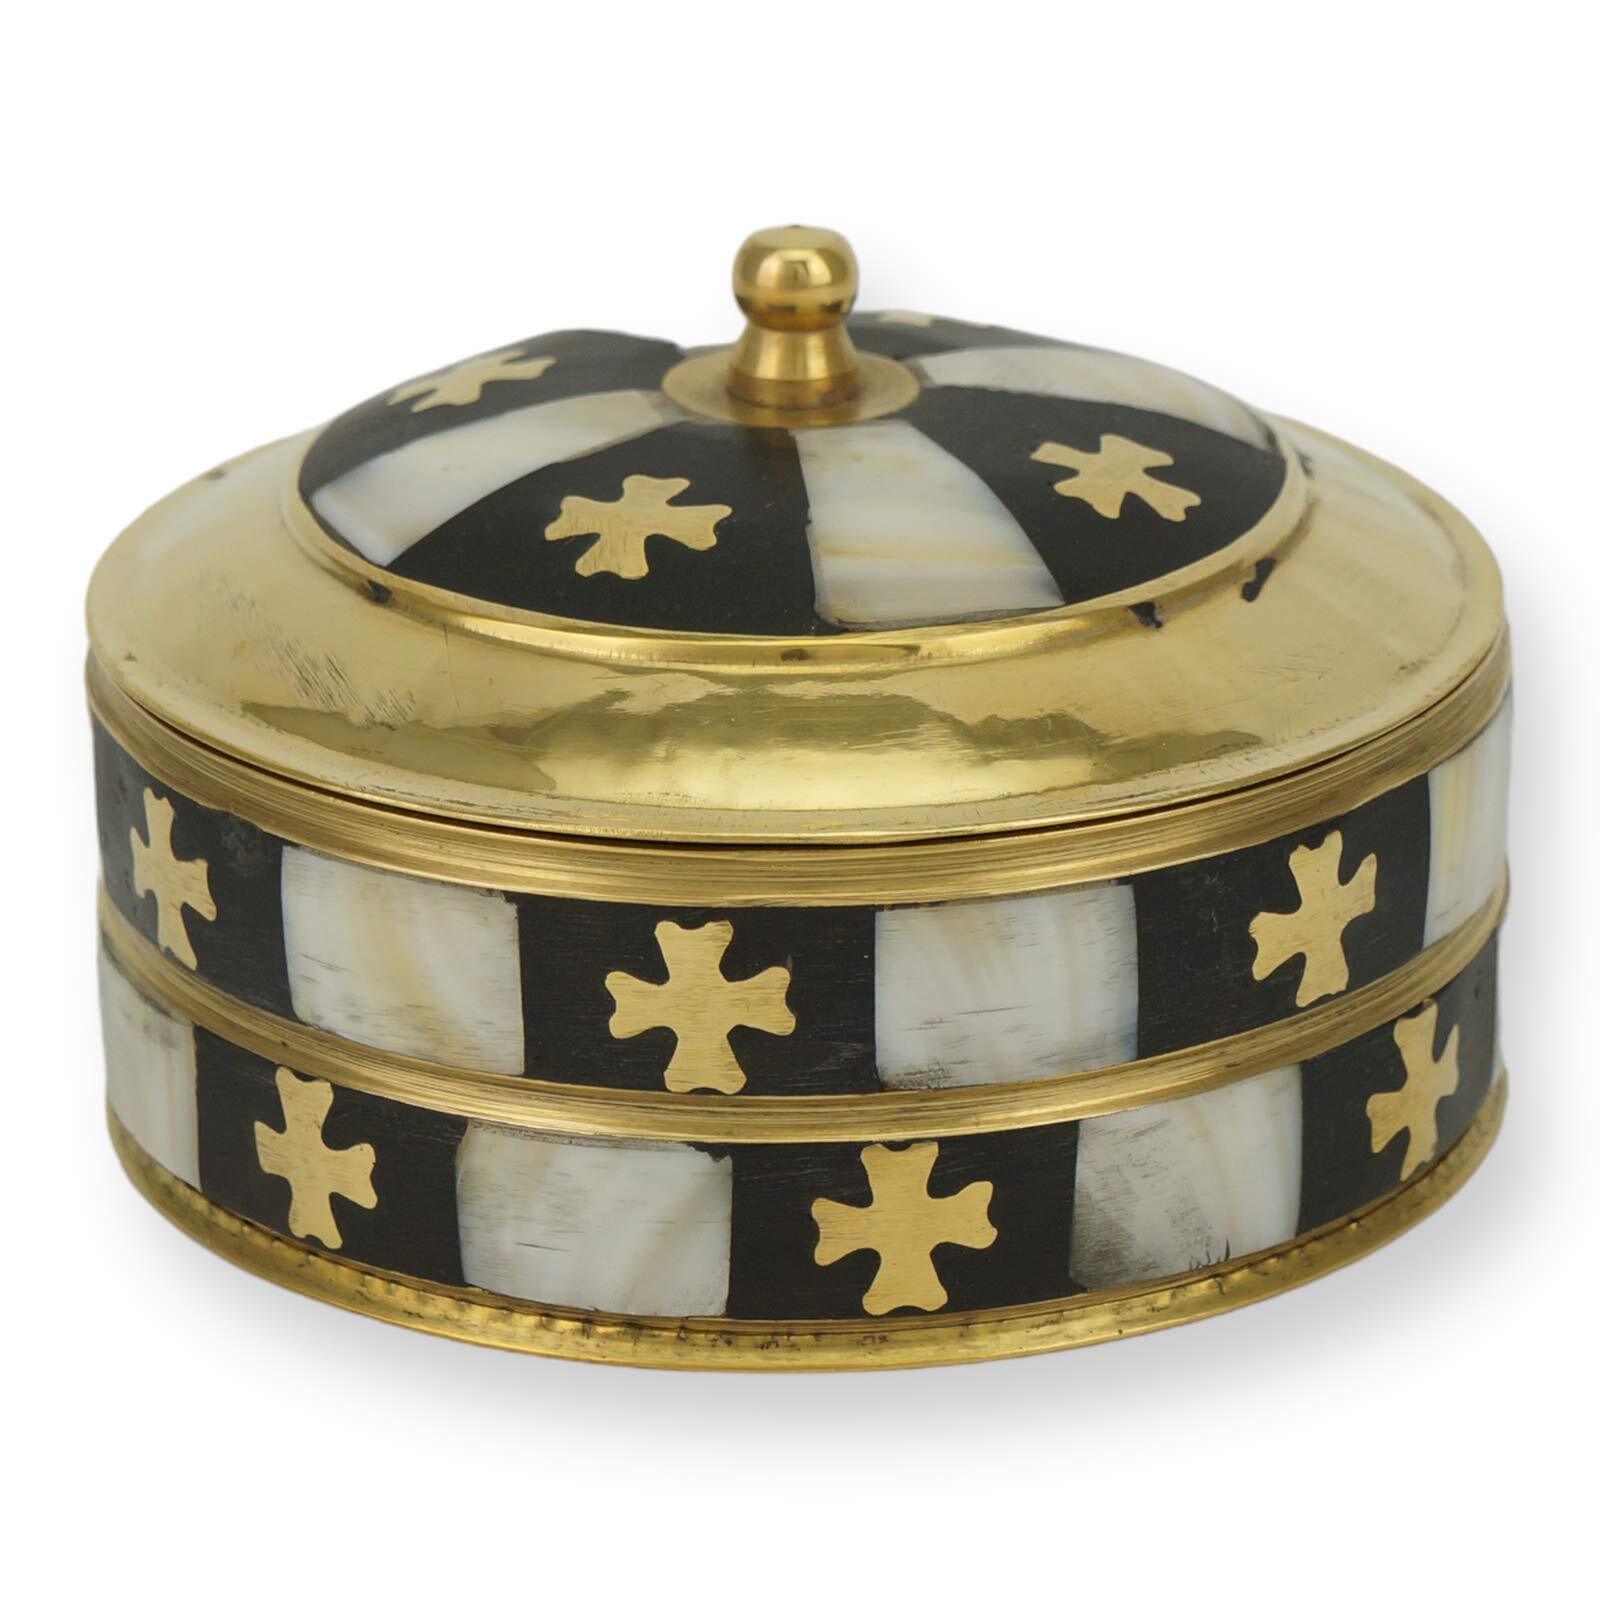 Round Brass Incense box with Cross Detailing - Orthodox Incense Box